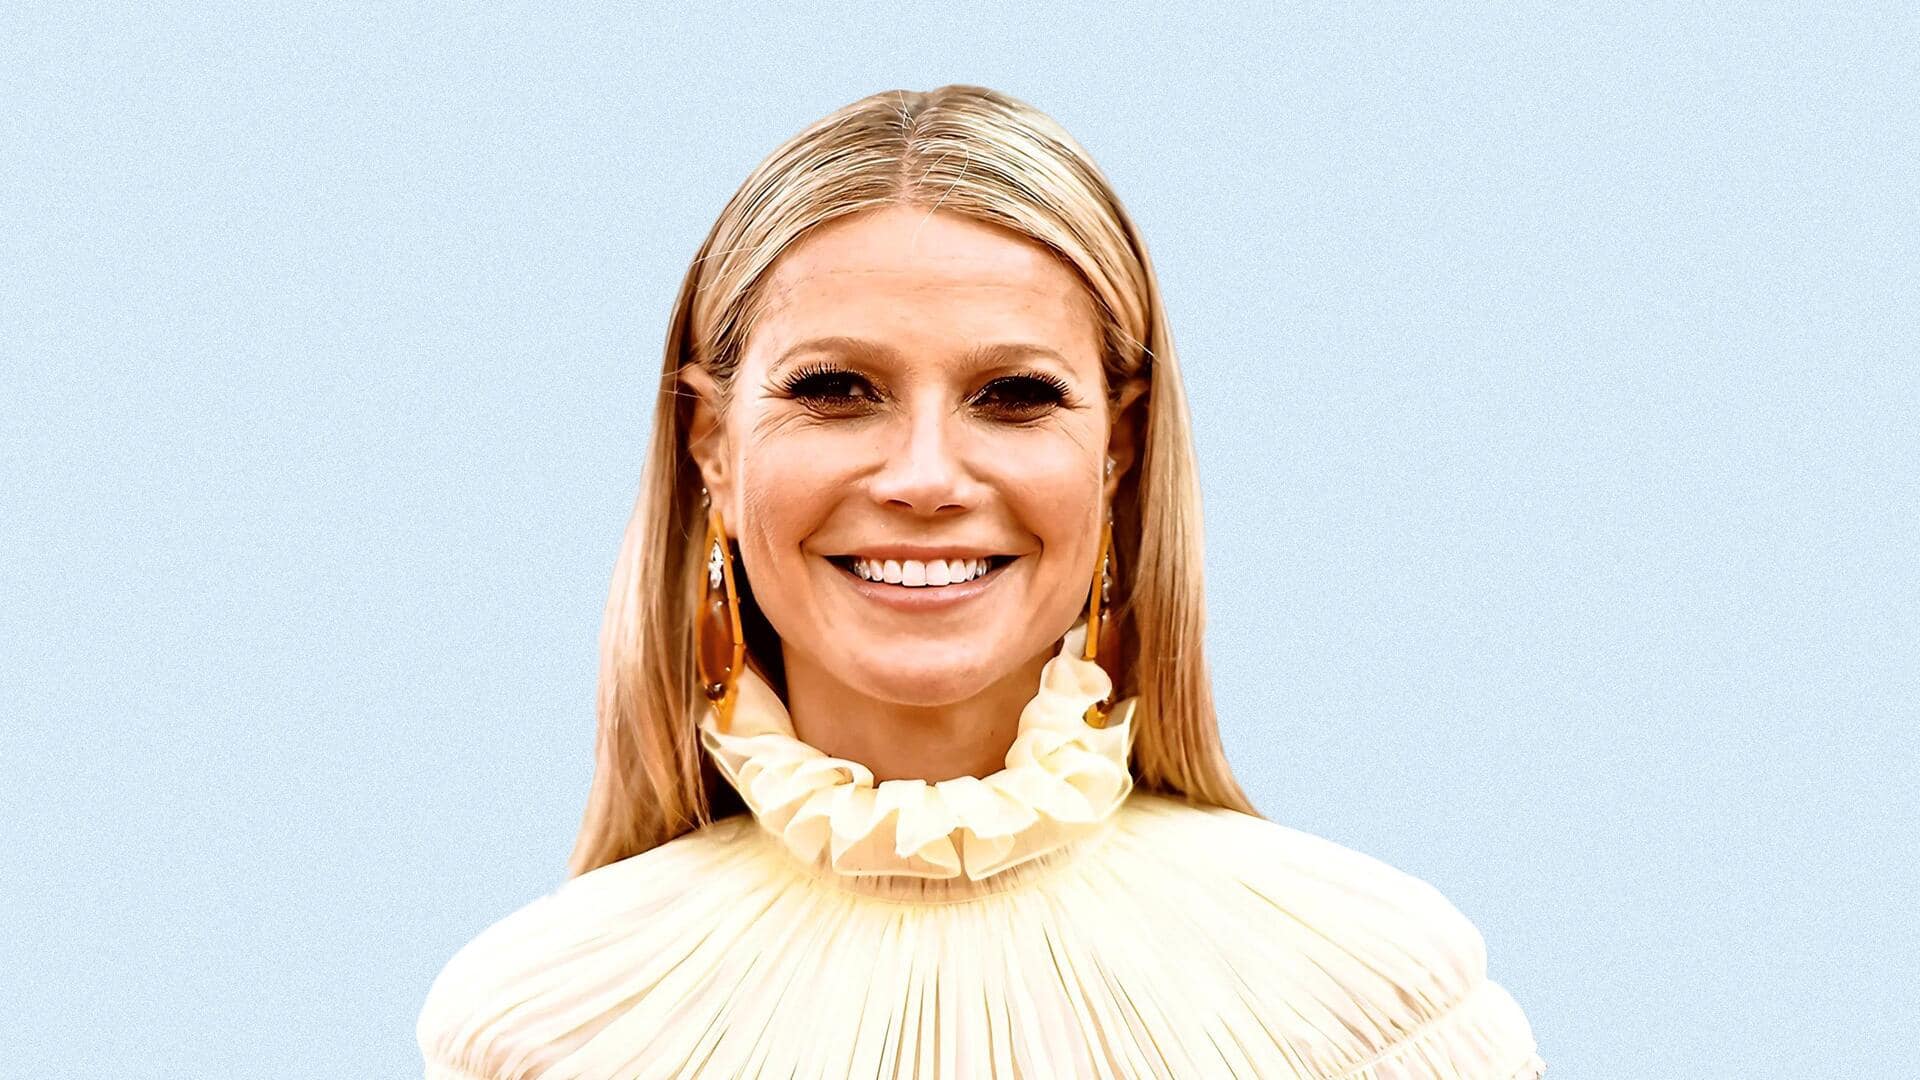 'Emma' to 'Shakespeare in Love': Gwyneth Paltrow's best performances 